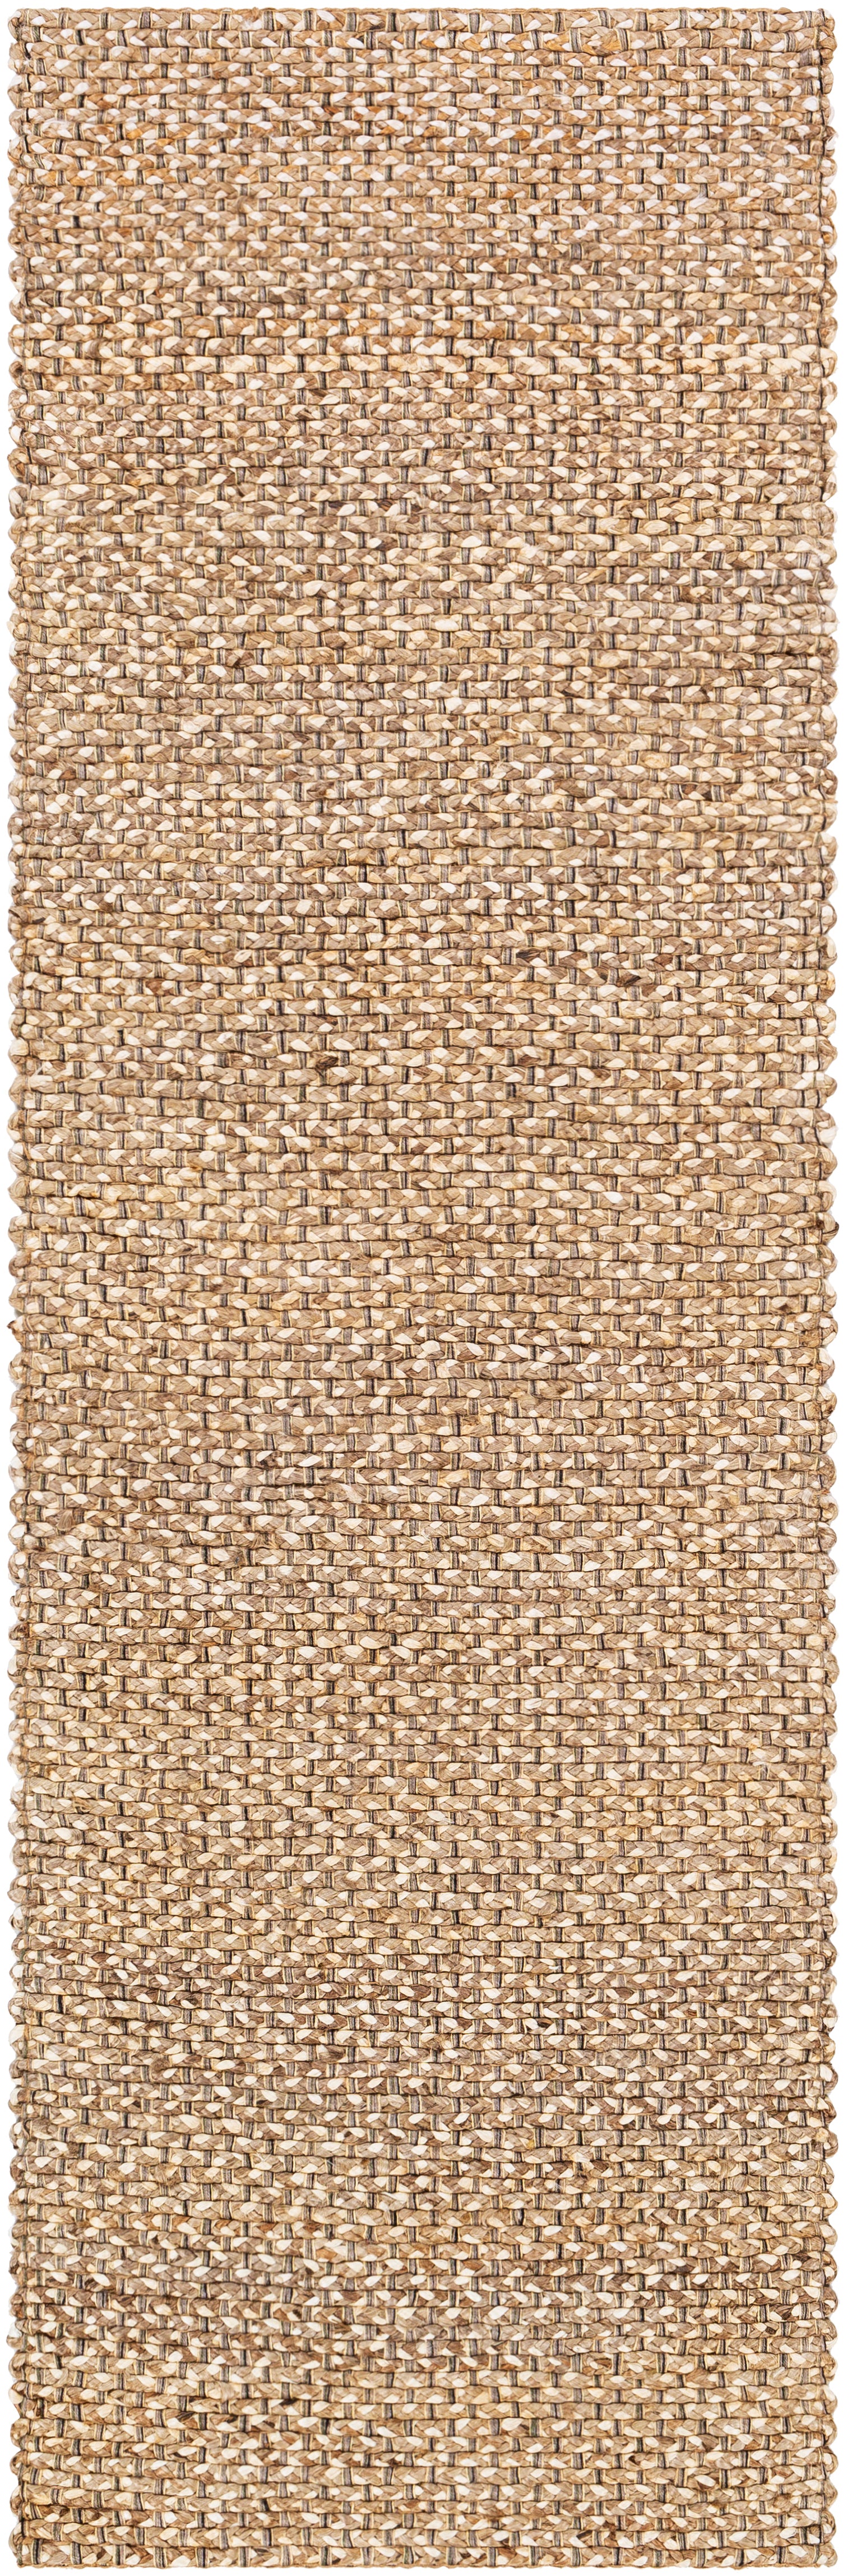 Surya Curacao Cur-2301 Taupe, Cream, Grass Green, Butter Area Rug